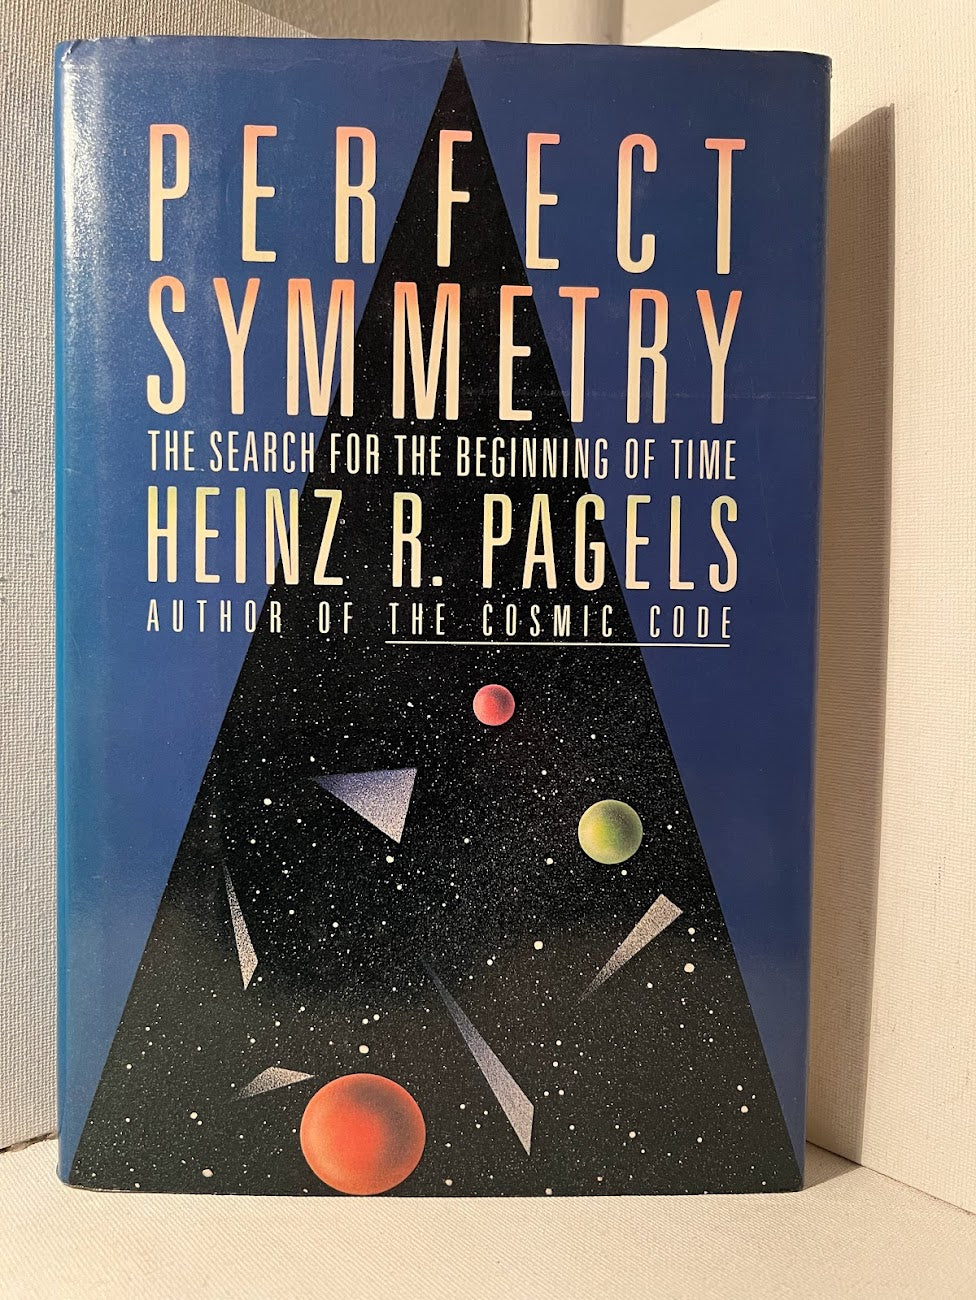 Perfect Symmetry by Heinz R. Pagels